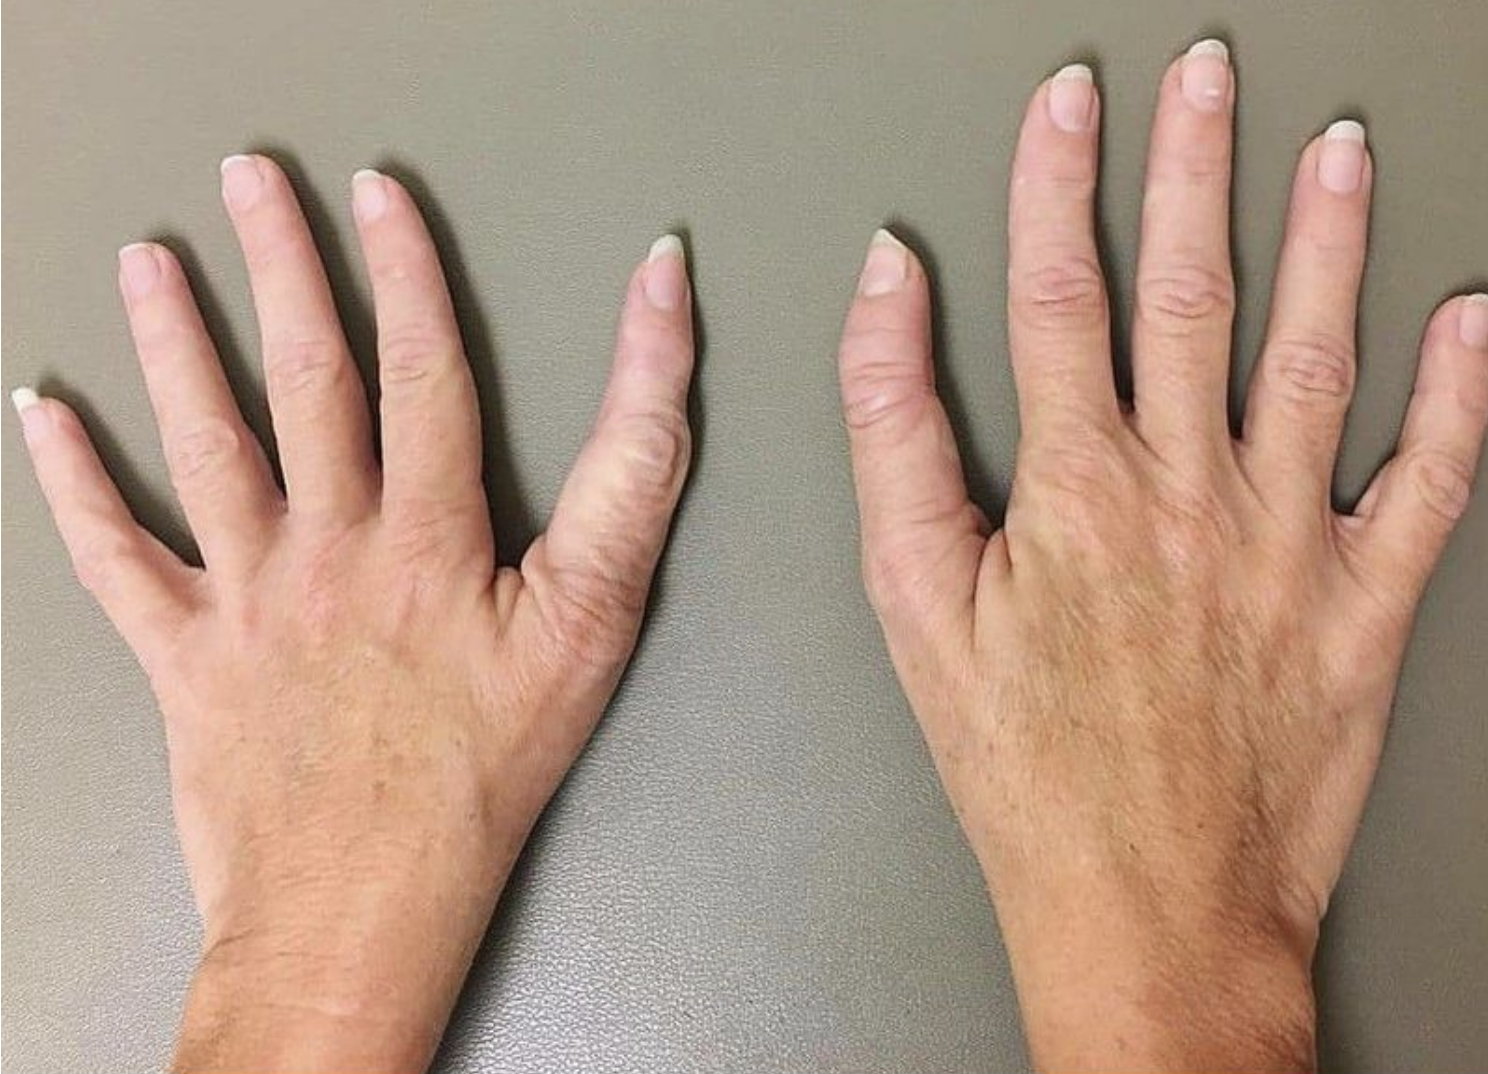 Two hands with very long thumbs